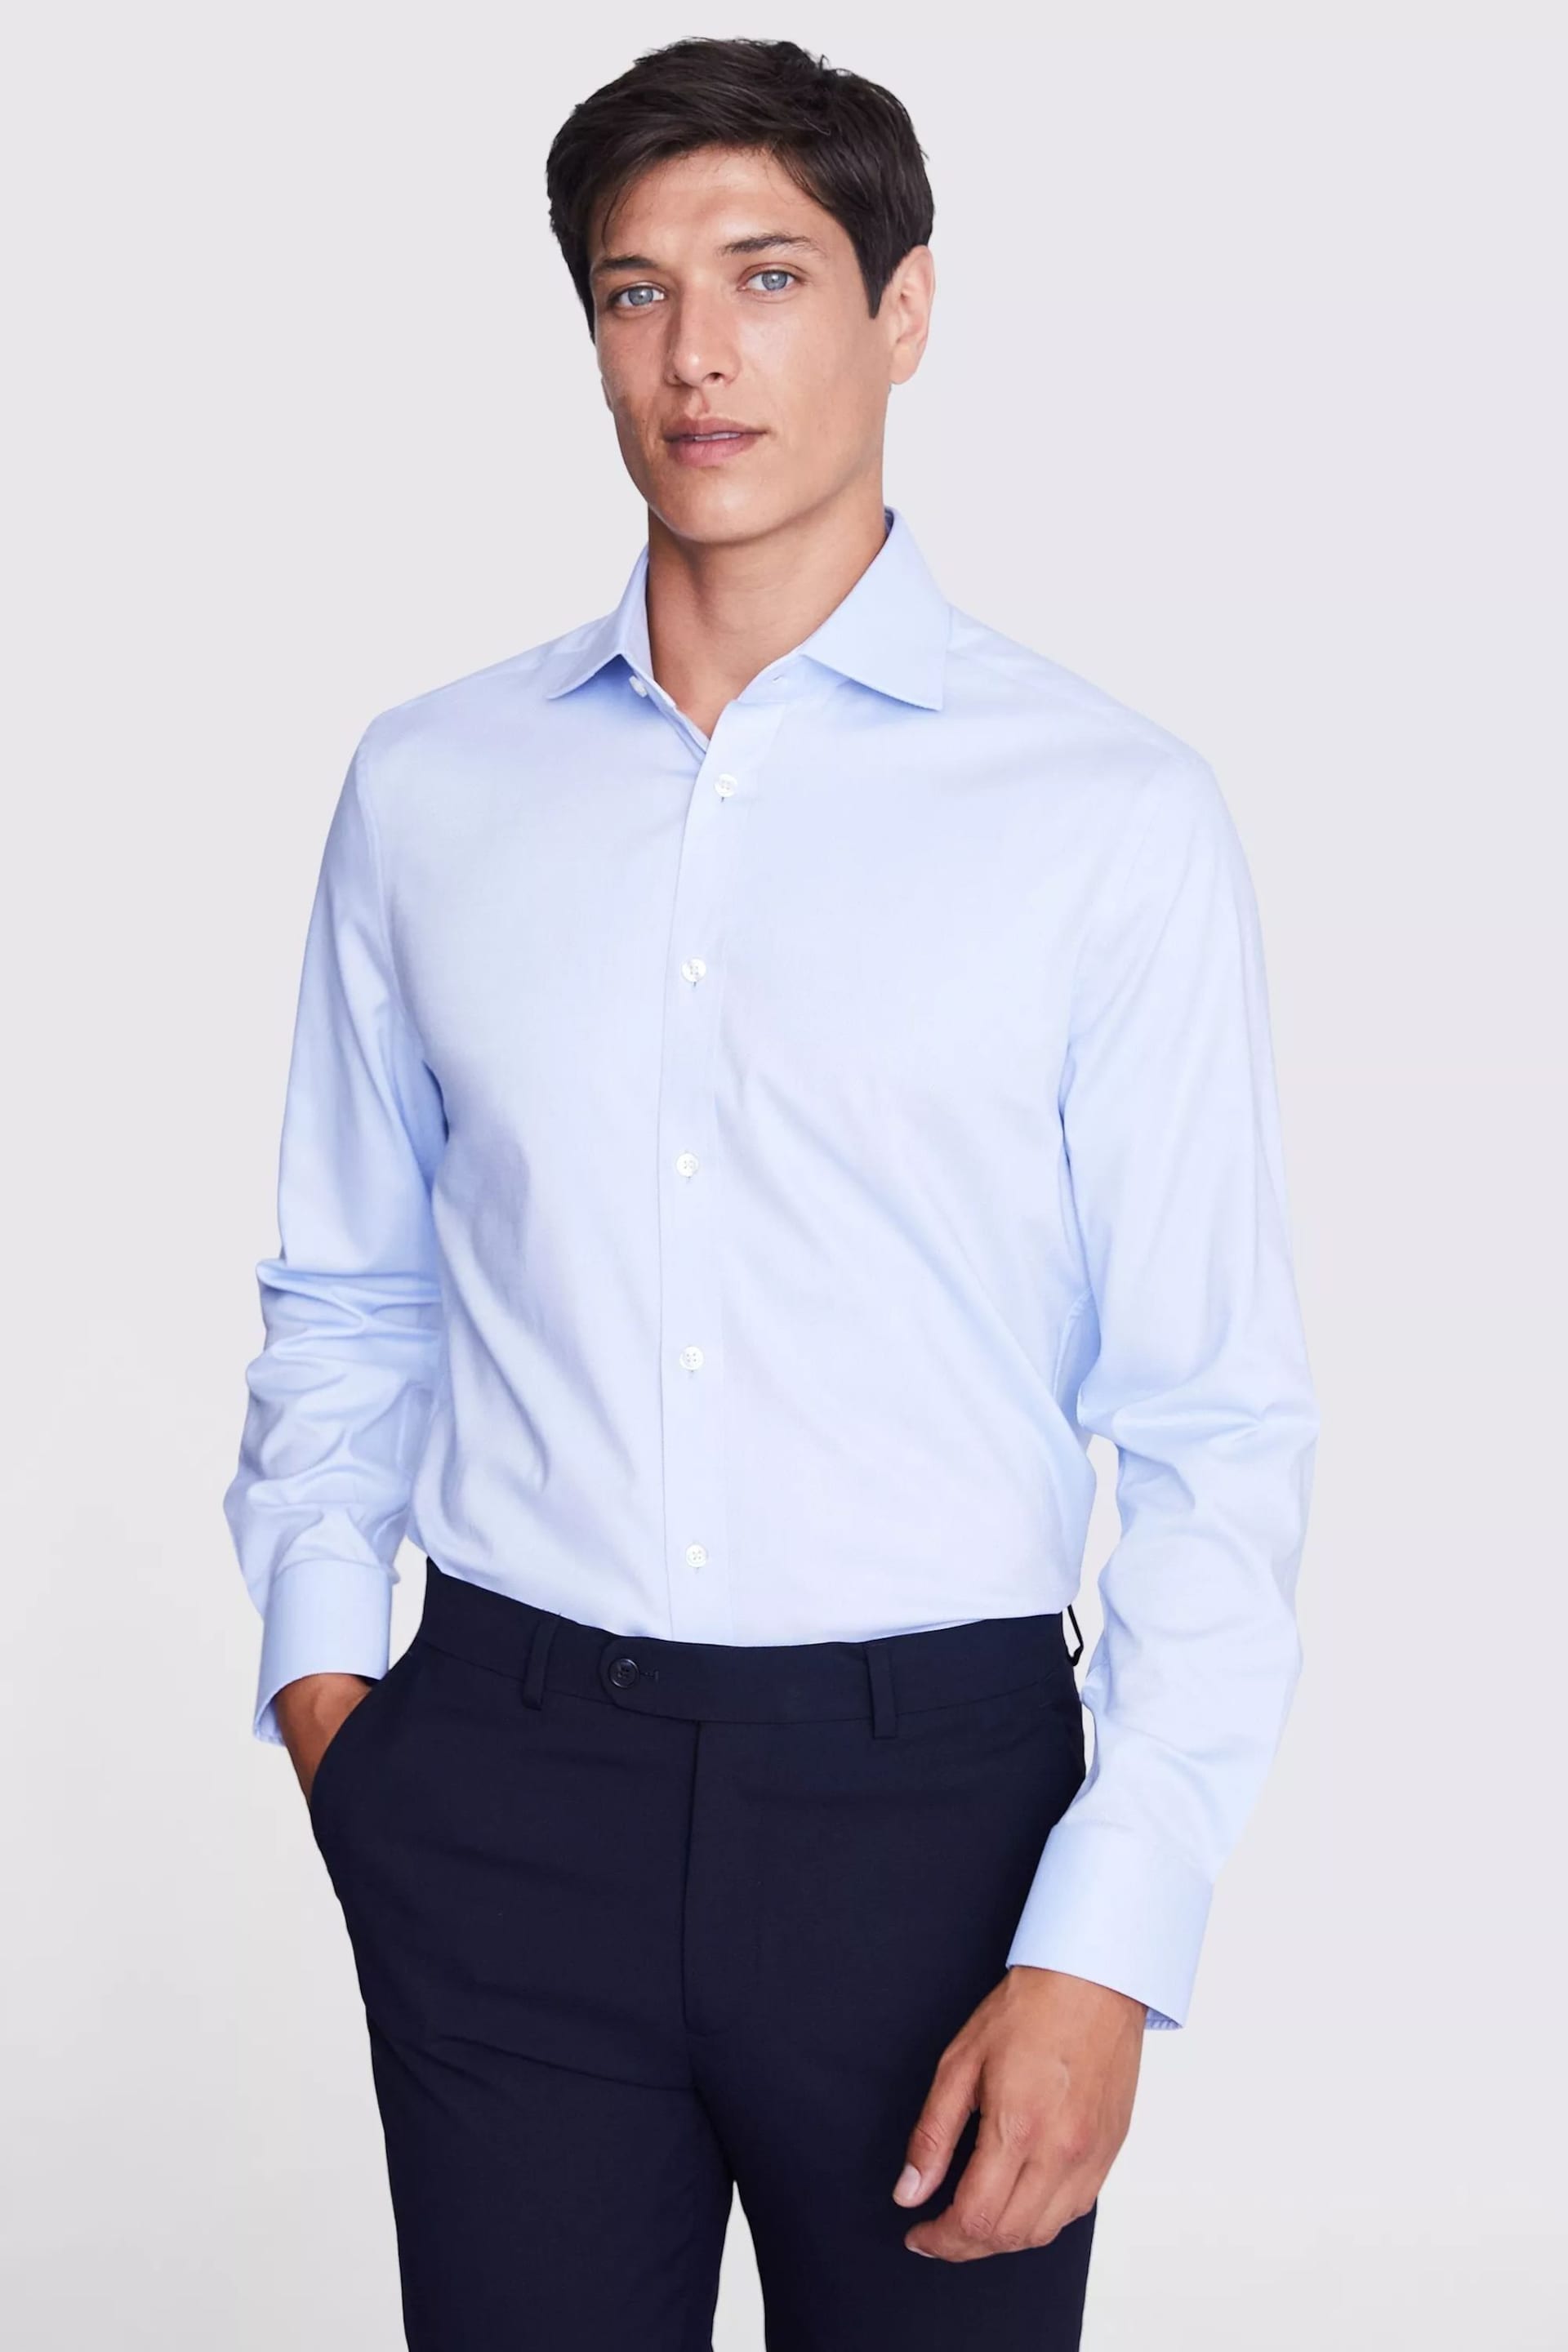 MOSS Blue Tailored Dobby Stretch Shirt - Image 1 of 3